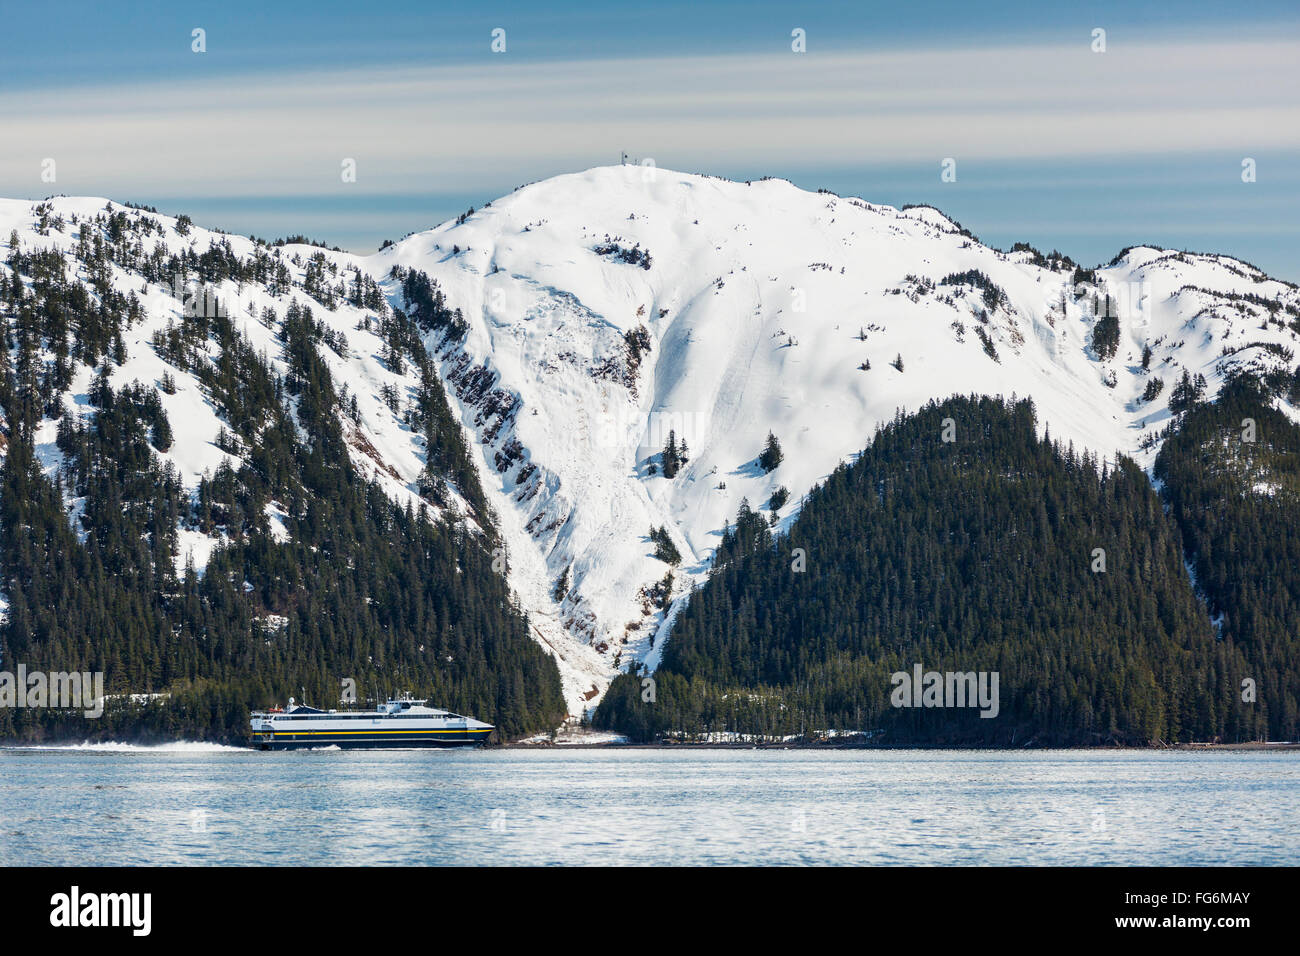 The Fast Ferry Chenega Of The Alaska Marine Highway System Motors Out Of The Passage Canal To Valdez, Prince William Sound, Whittier, Southcentral ... Stock Photo